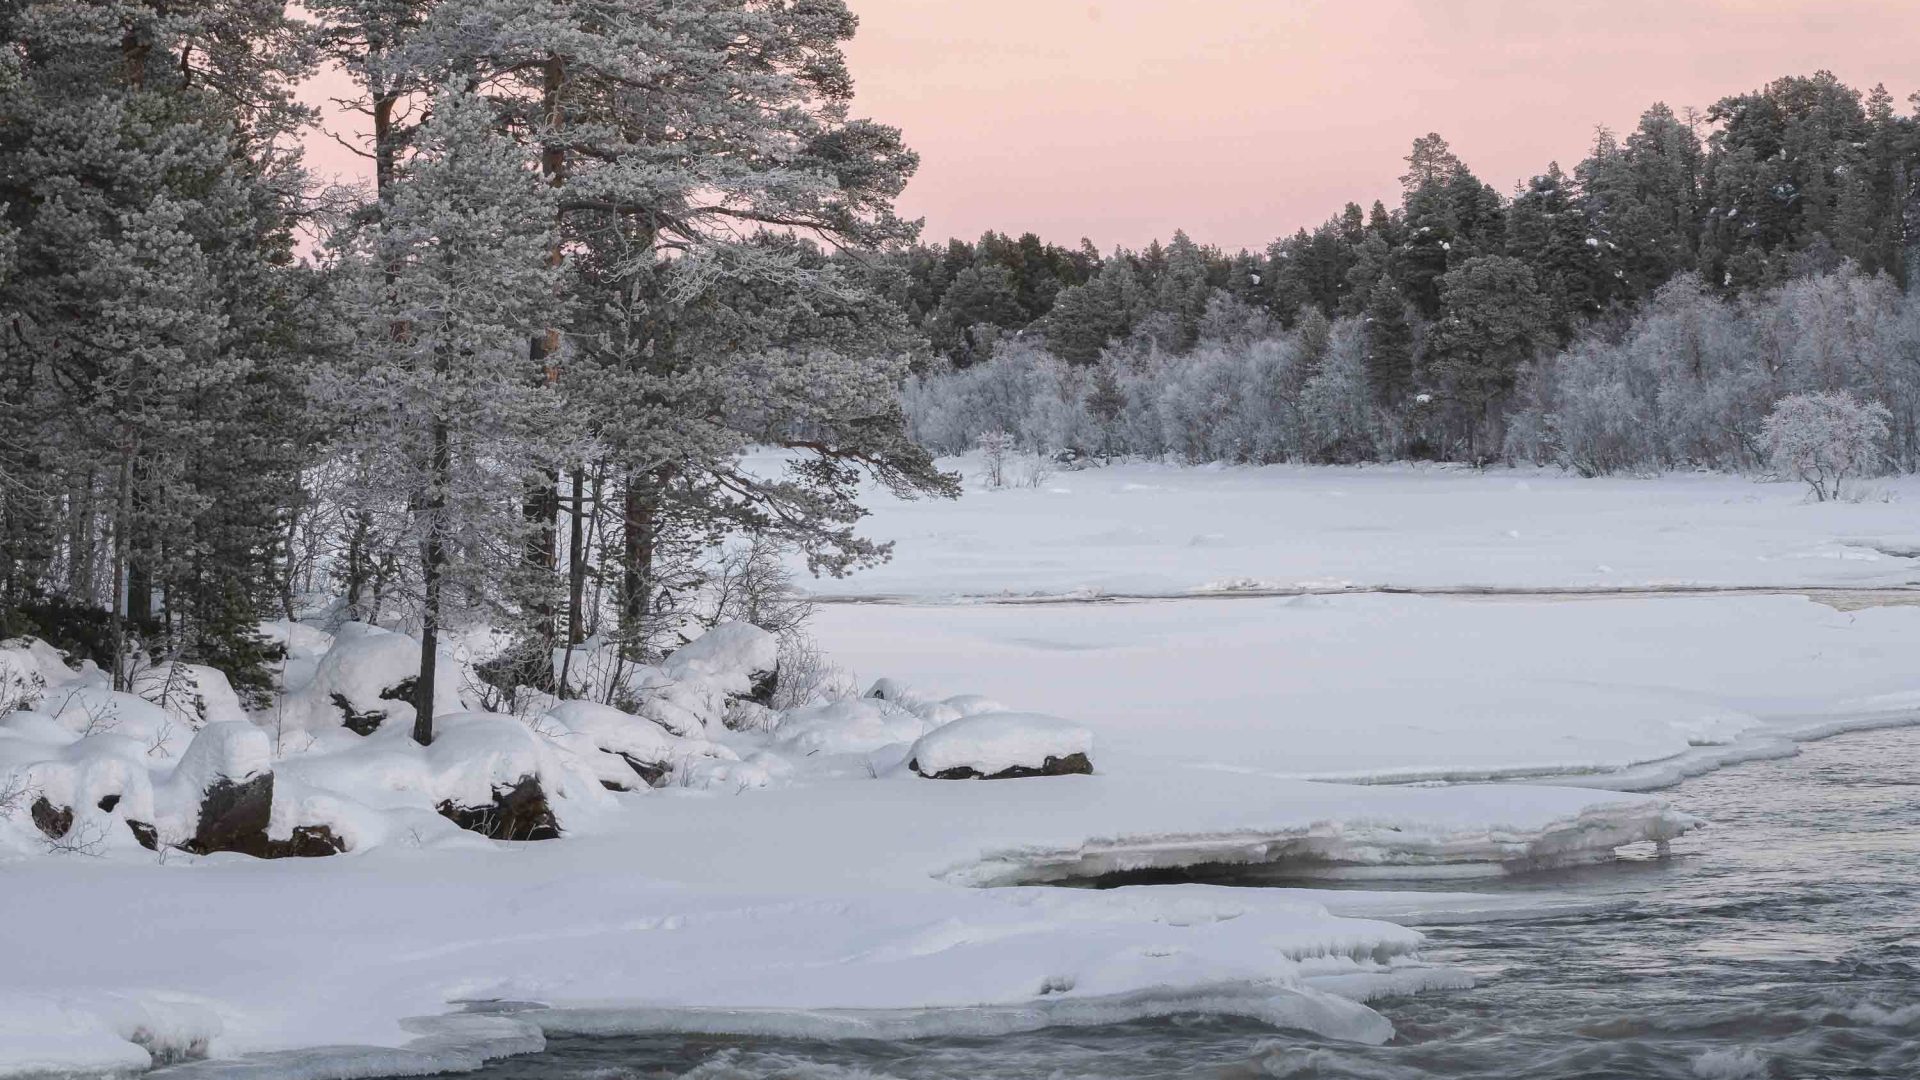 Snow approaches the edge of a lake. The sky is pink with the light at the end of the day.